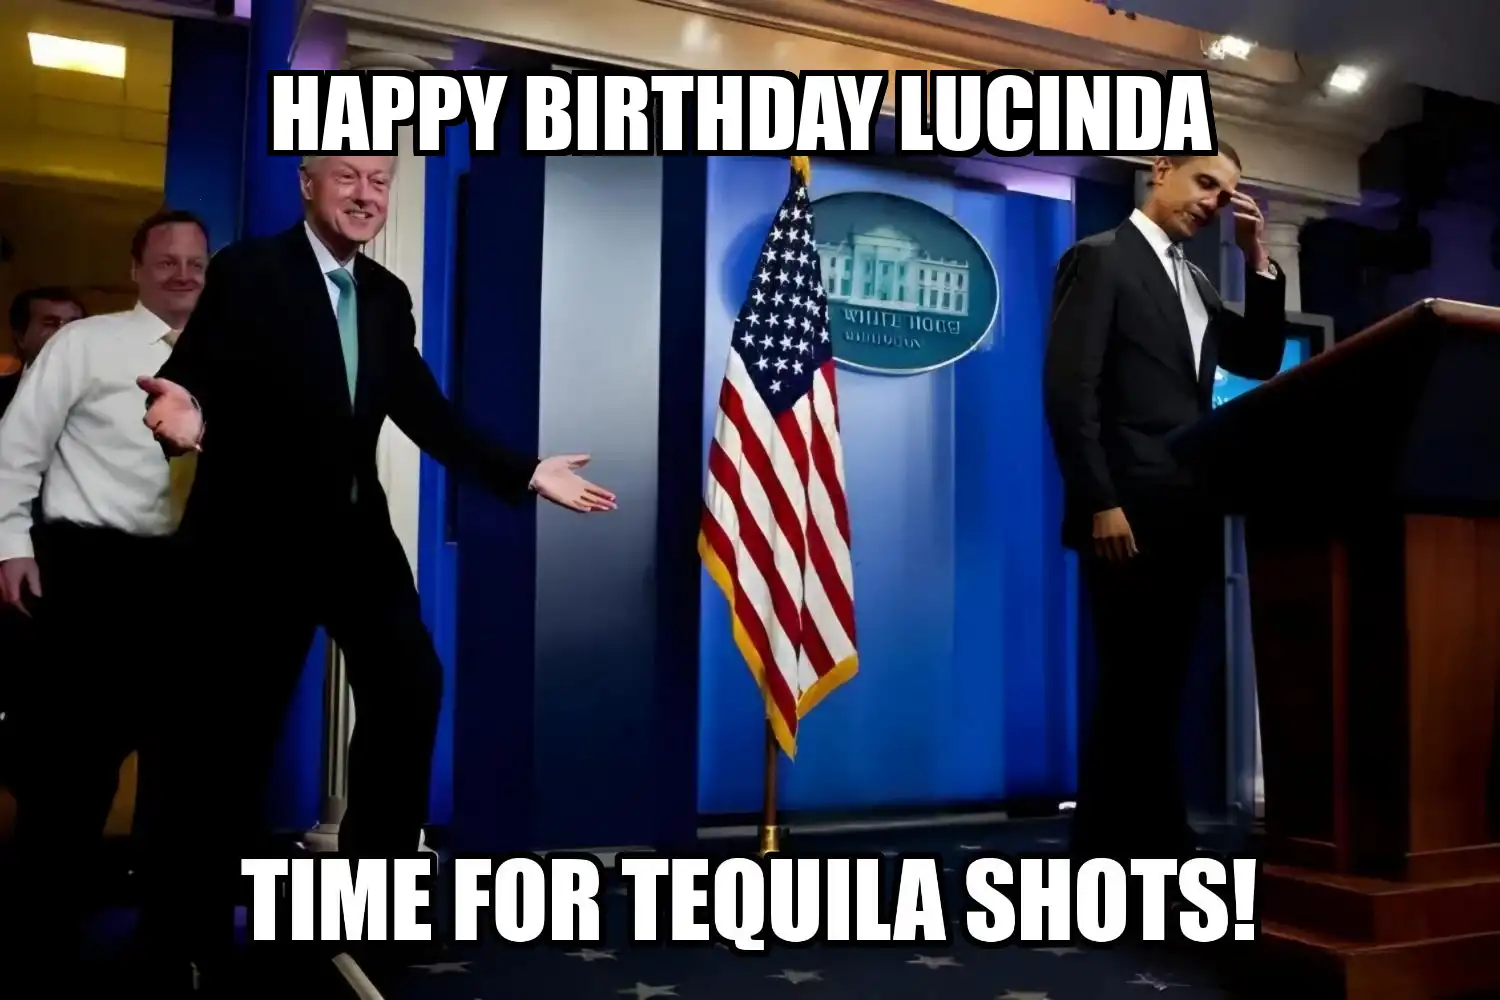 Happy Birthday Lucinda Time For Tequila Shots Memes